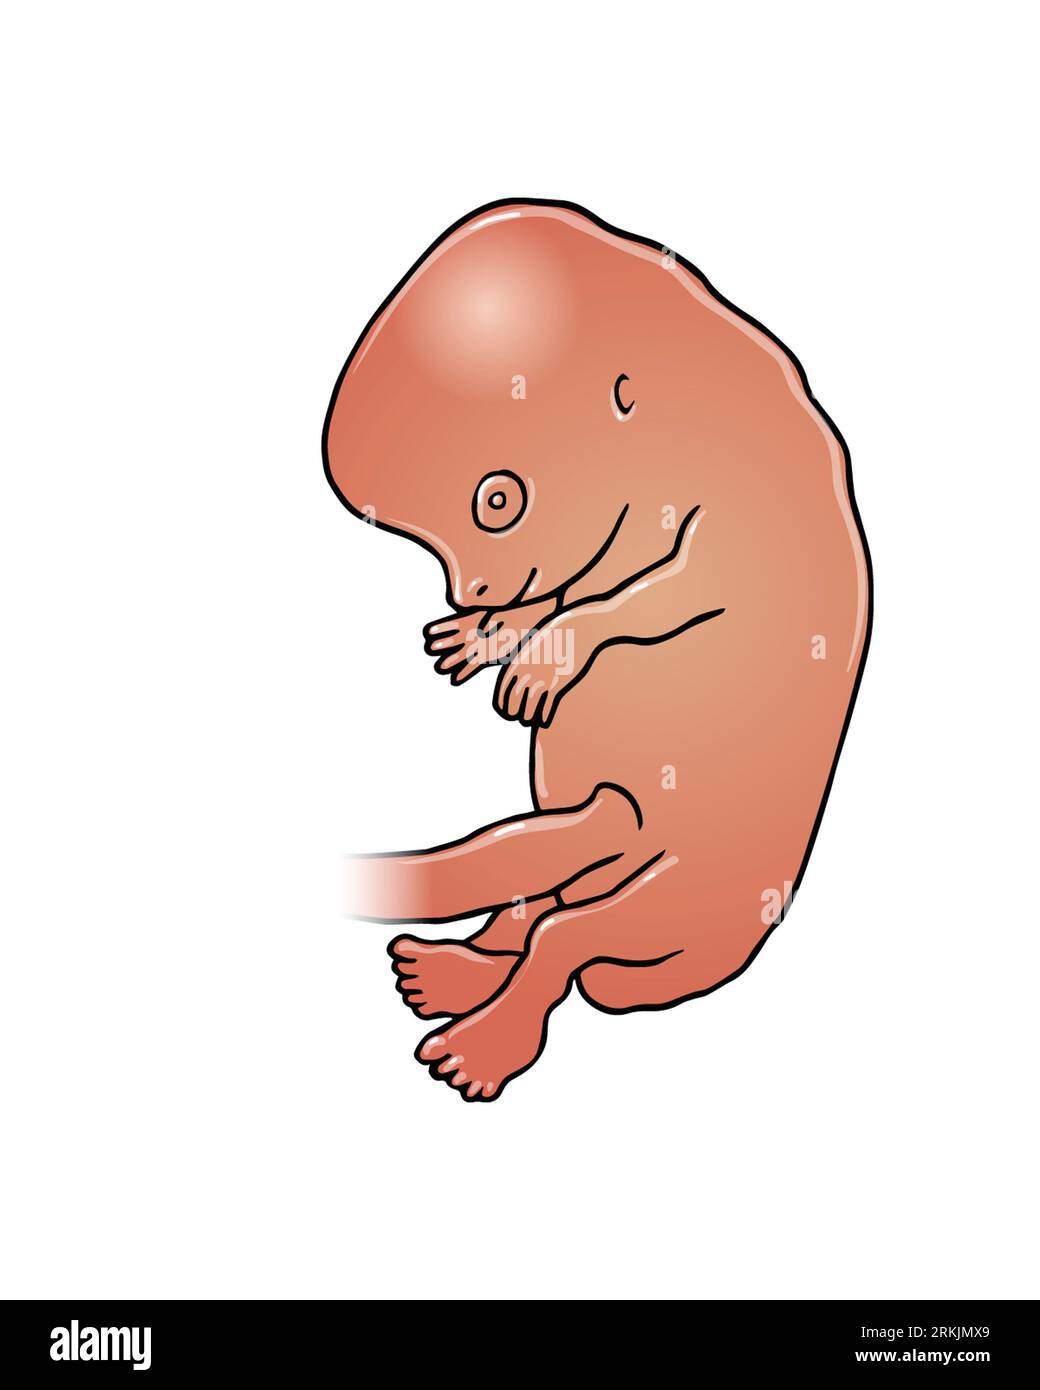 Medical art illustration of a dark skinned baby foetus at around two months, 8 weeks, during the first trimester of a pregnancy, foetal development. Stock Photo